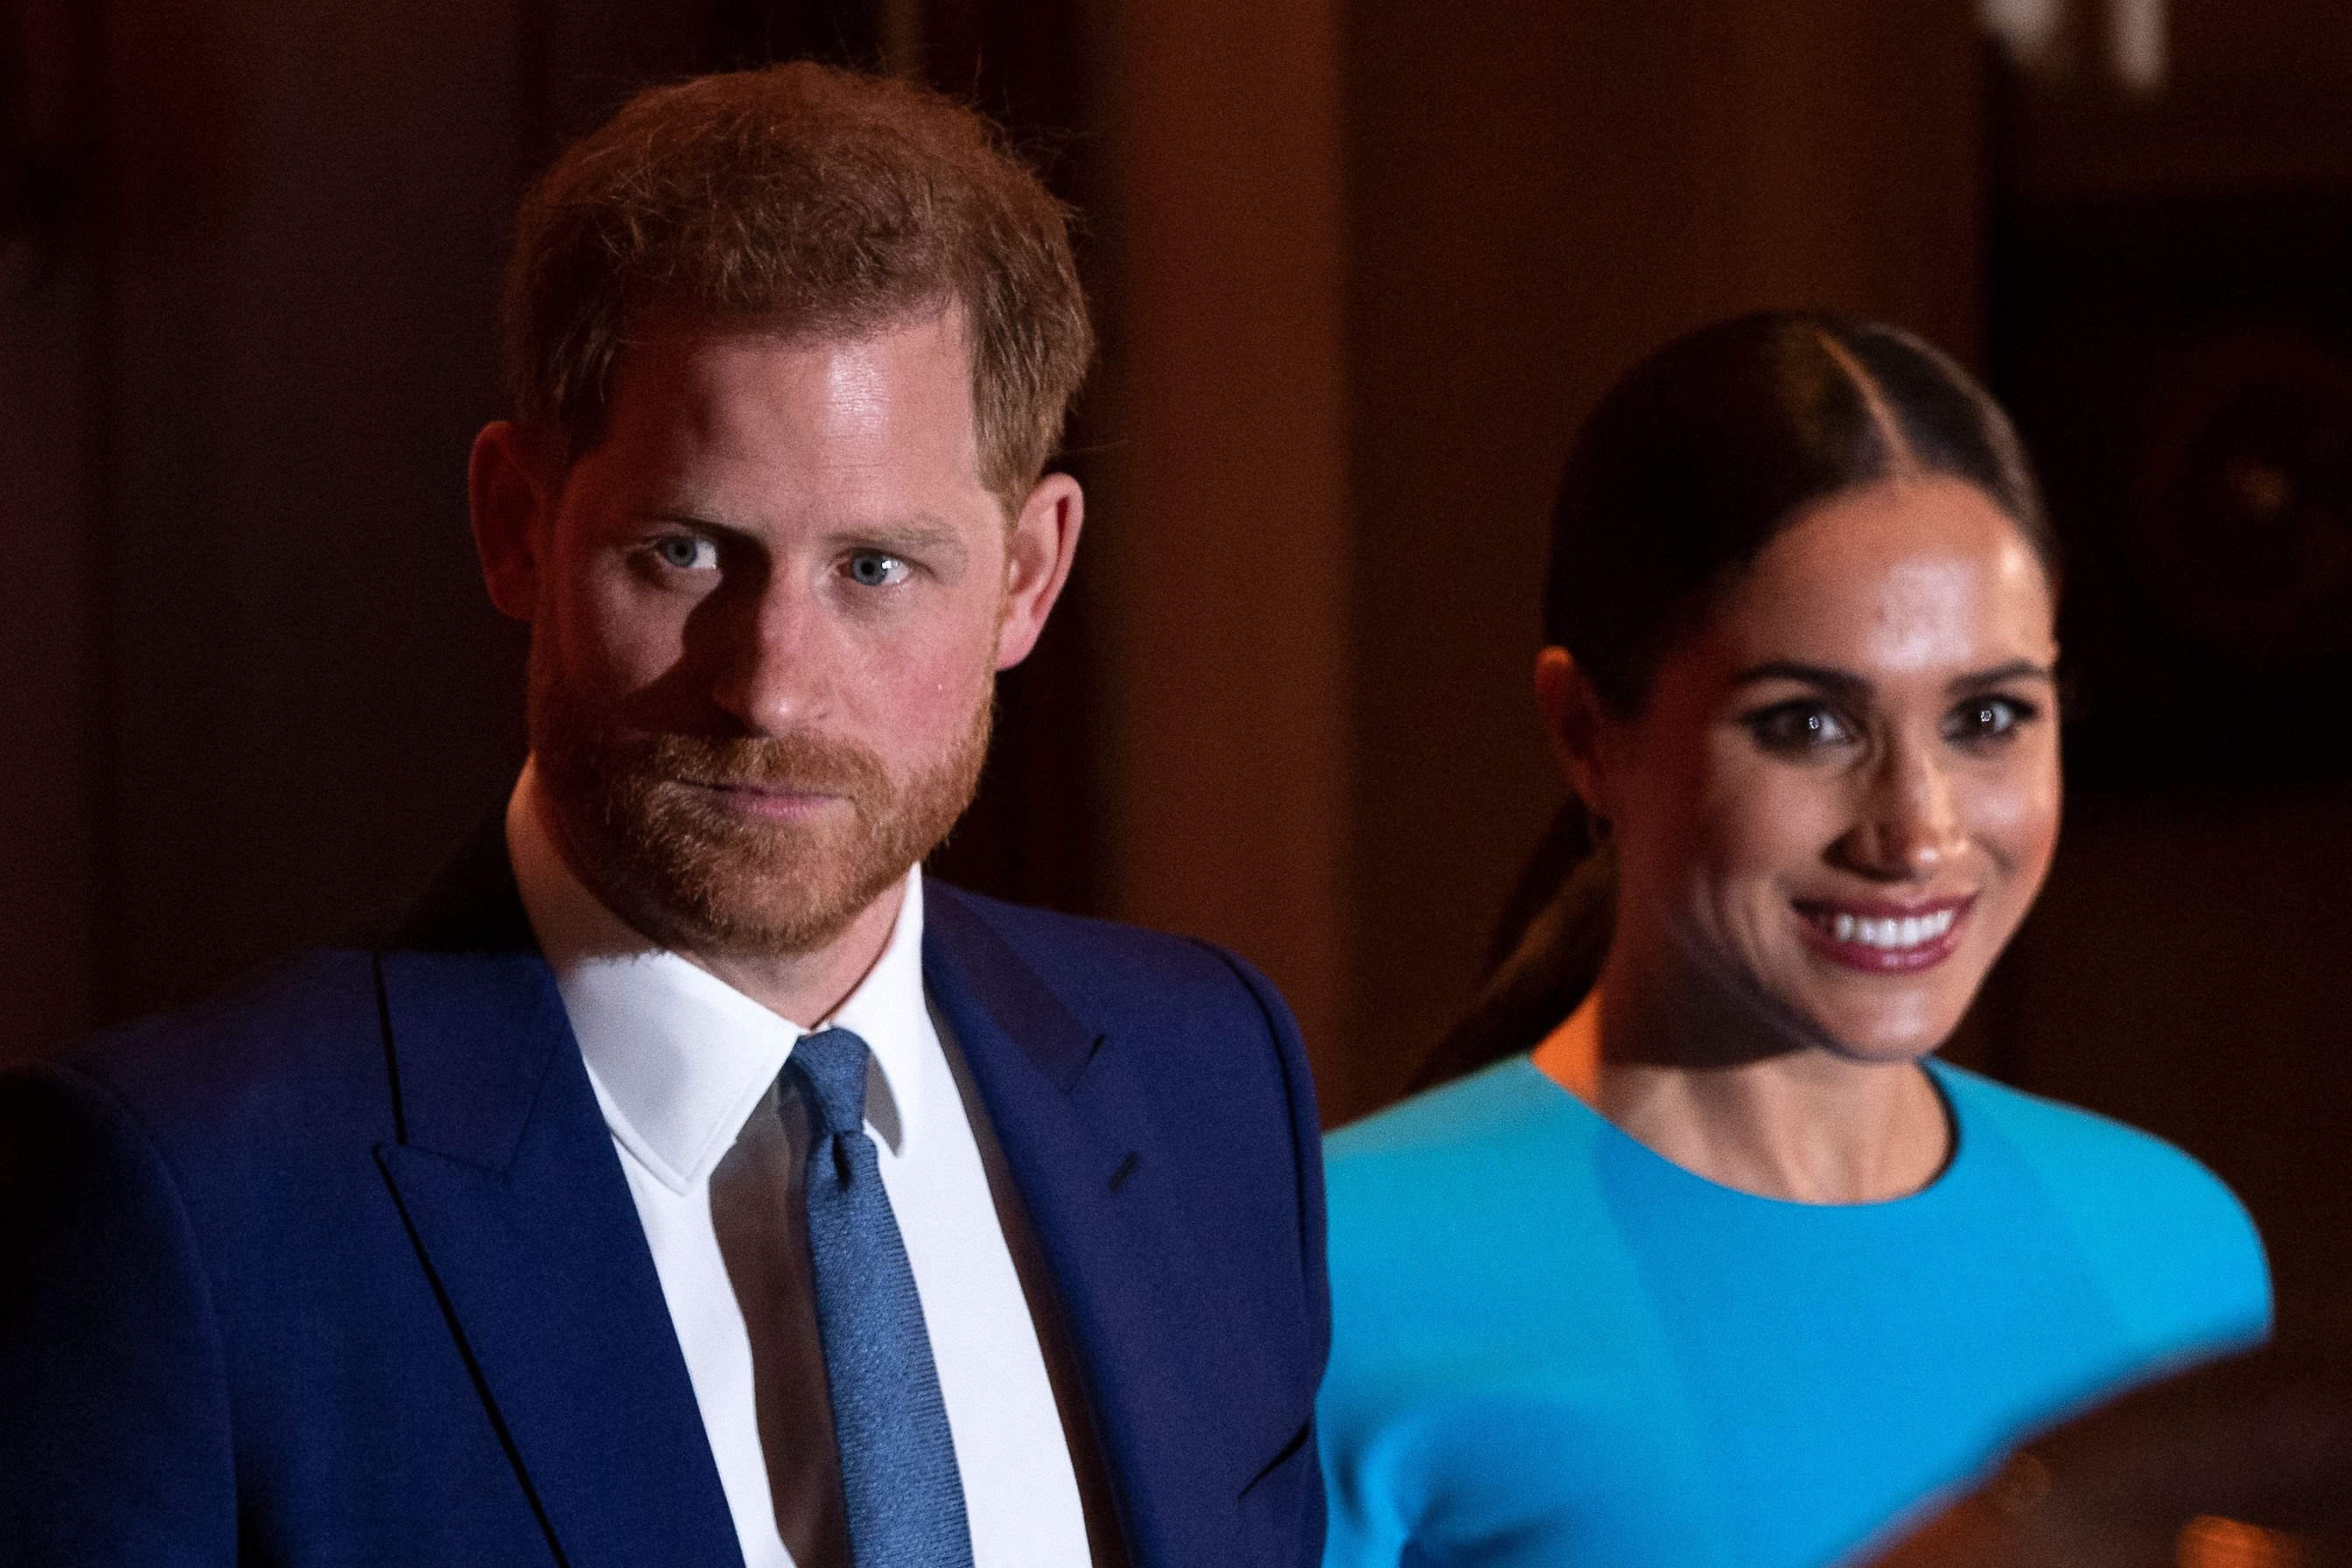 Prince Harry and Duchess Meghan at the Endeavour Fund Awards in London on March 5, 2020. | Source: Getty Images